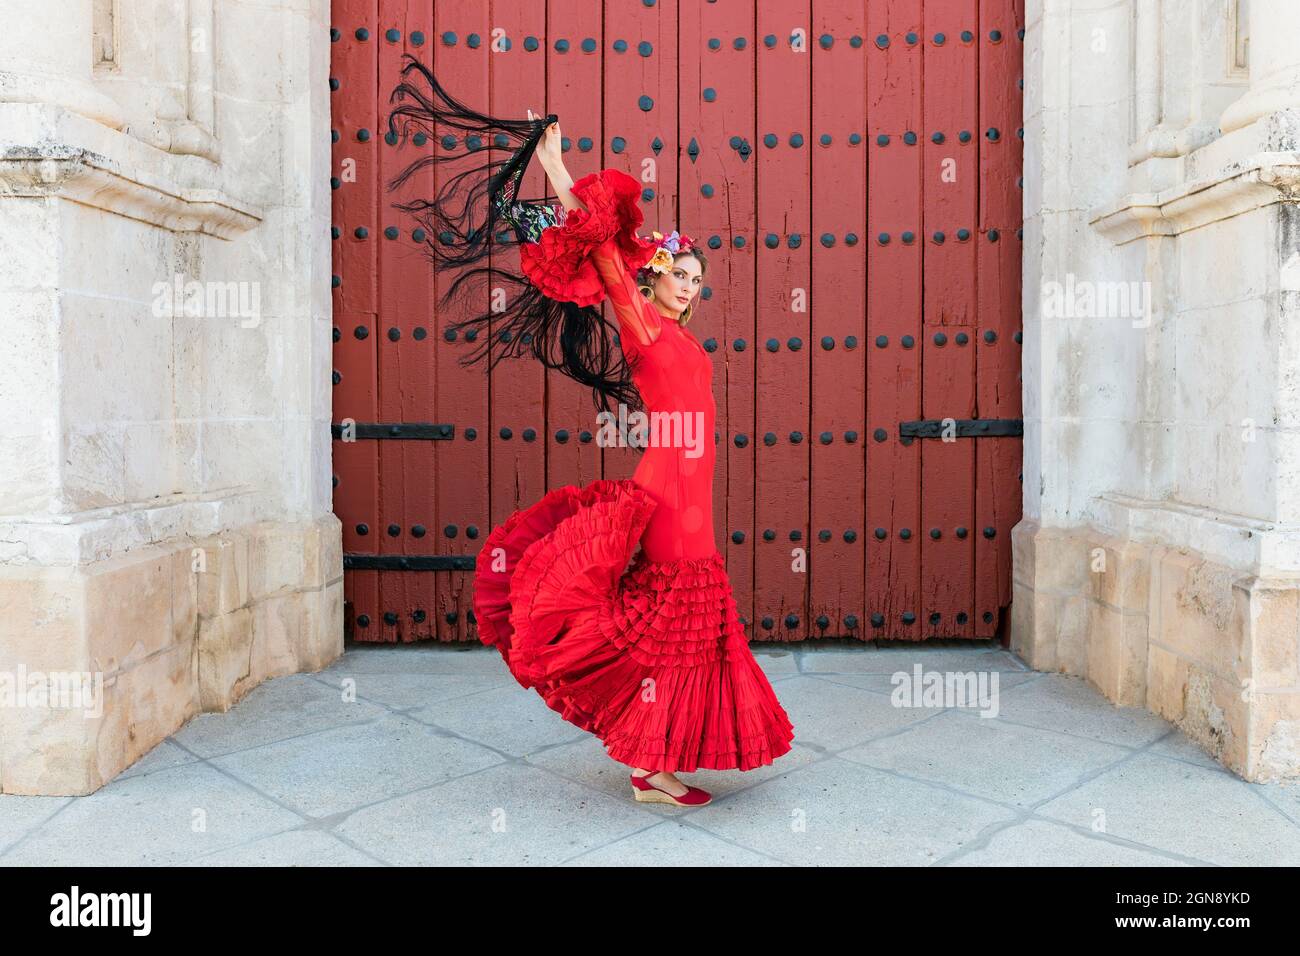 Female flamenco dancing with hands raised by door Stock Photo